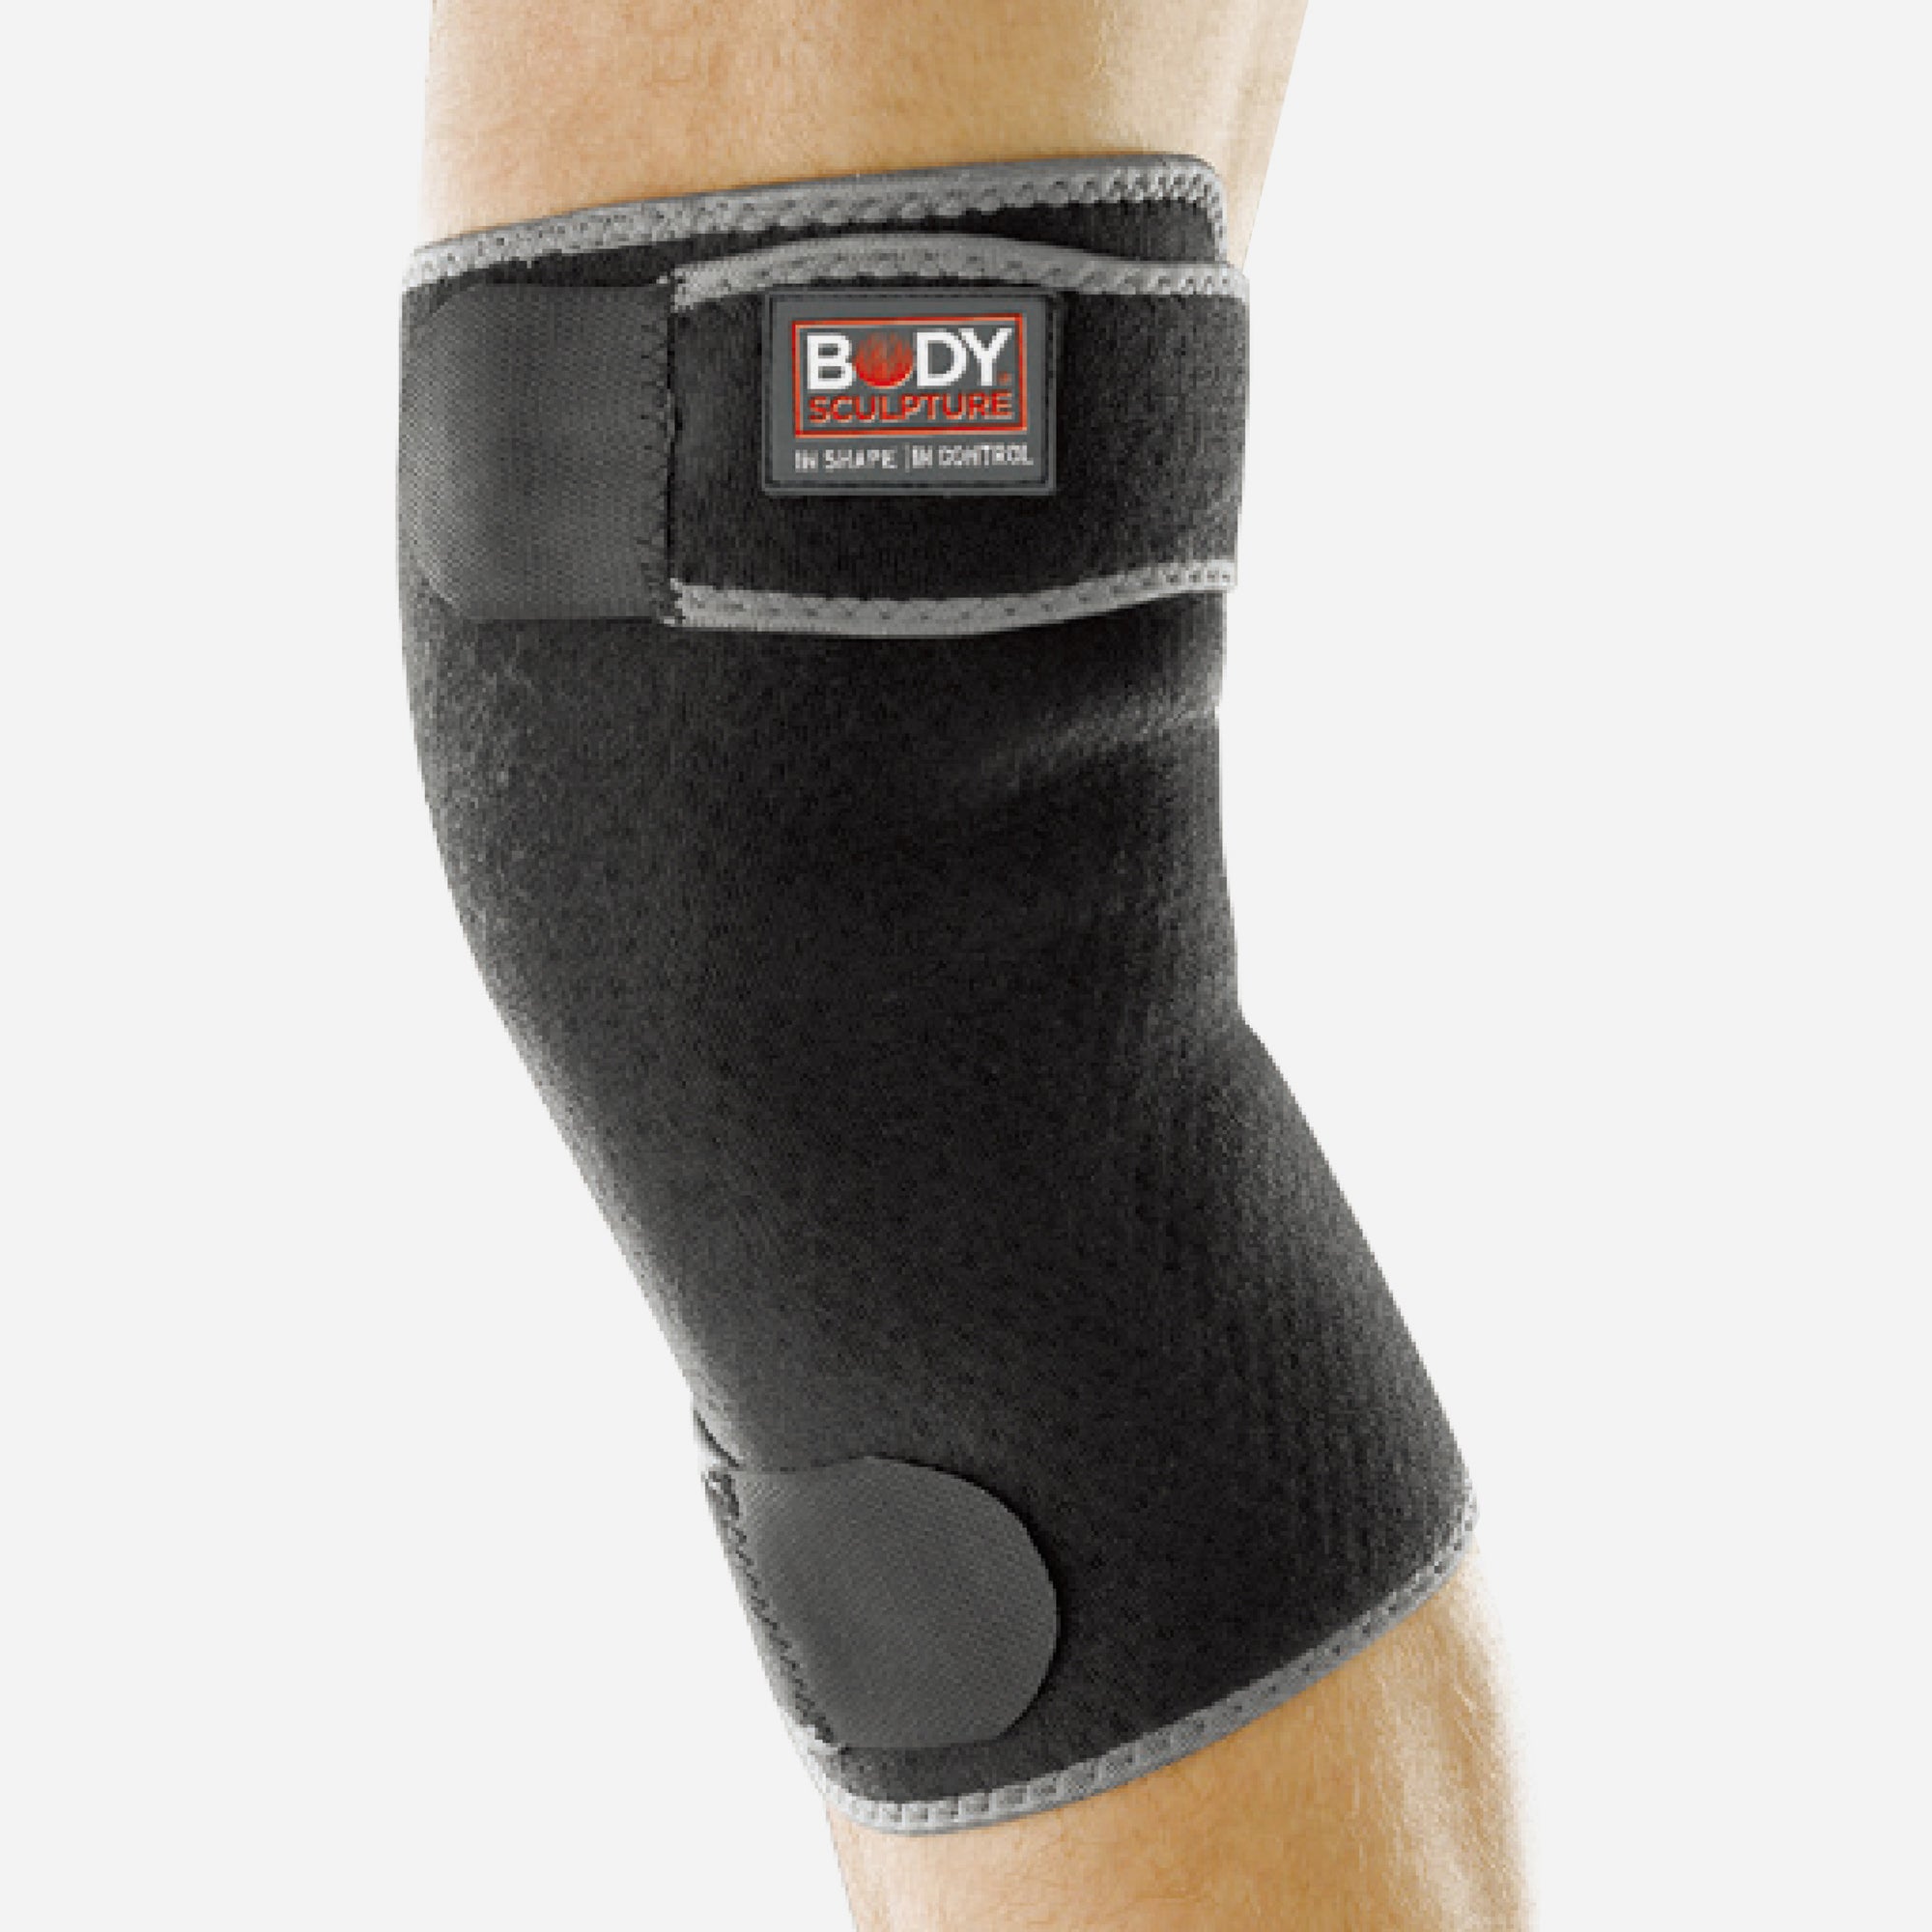 Dụng Cụ Hỗ Trợ Đầu Gối Body Sculpture Knee Support With Terry Cloth - Supersports Vietnam